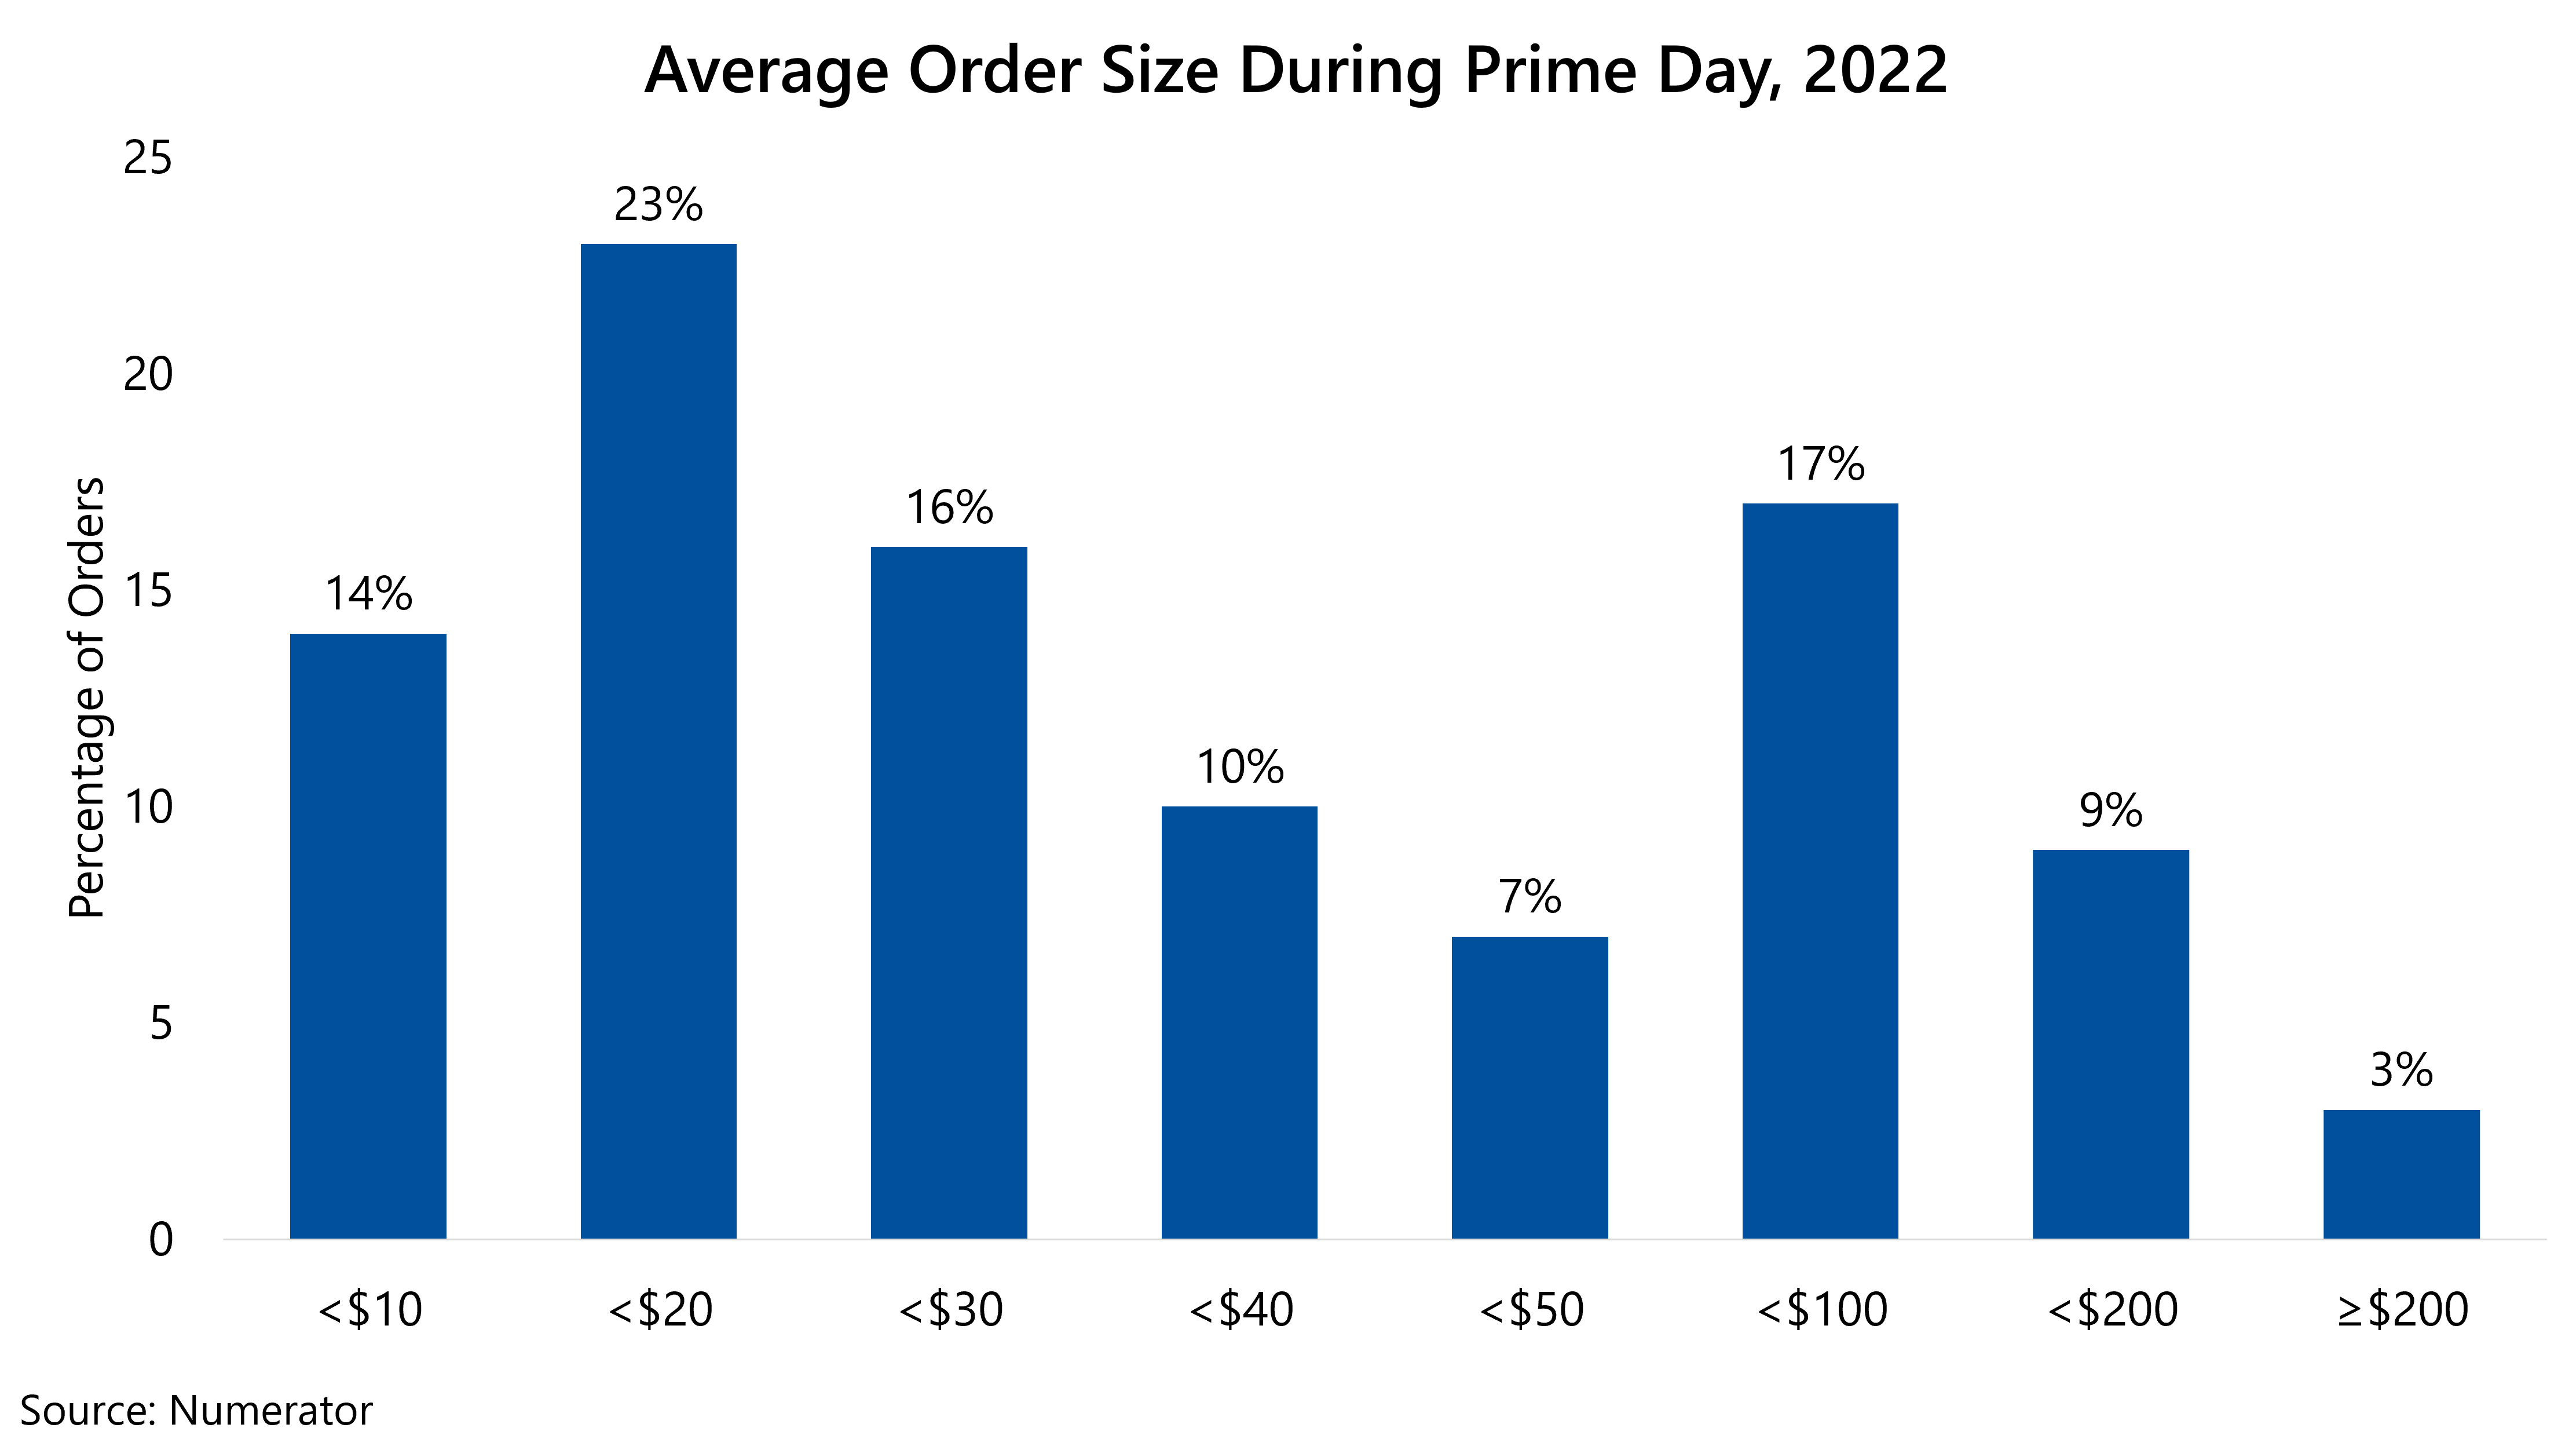 Average order size during Amazon prime day sales in 2022